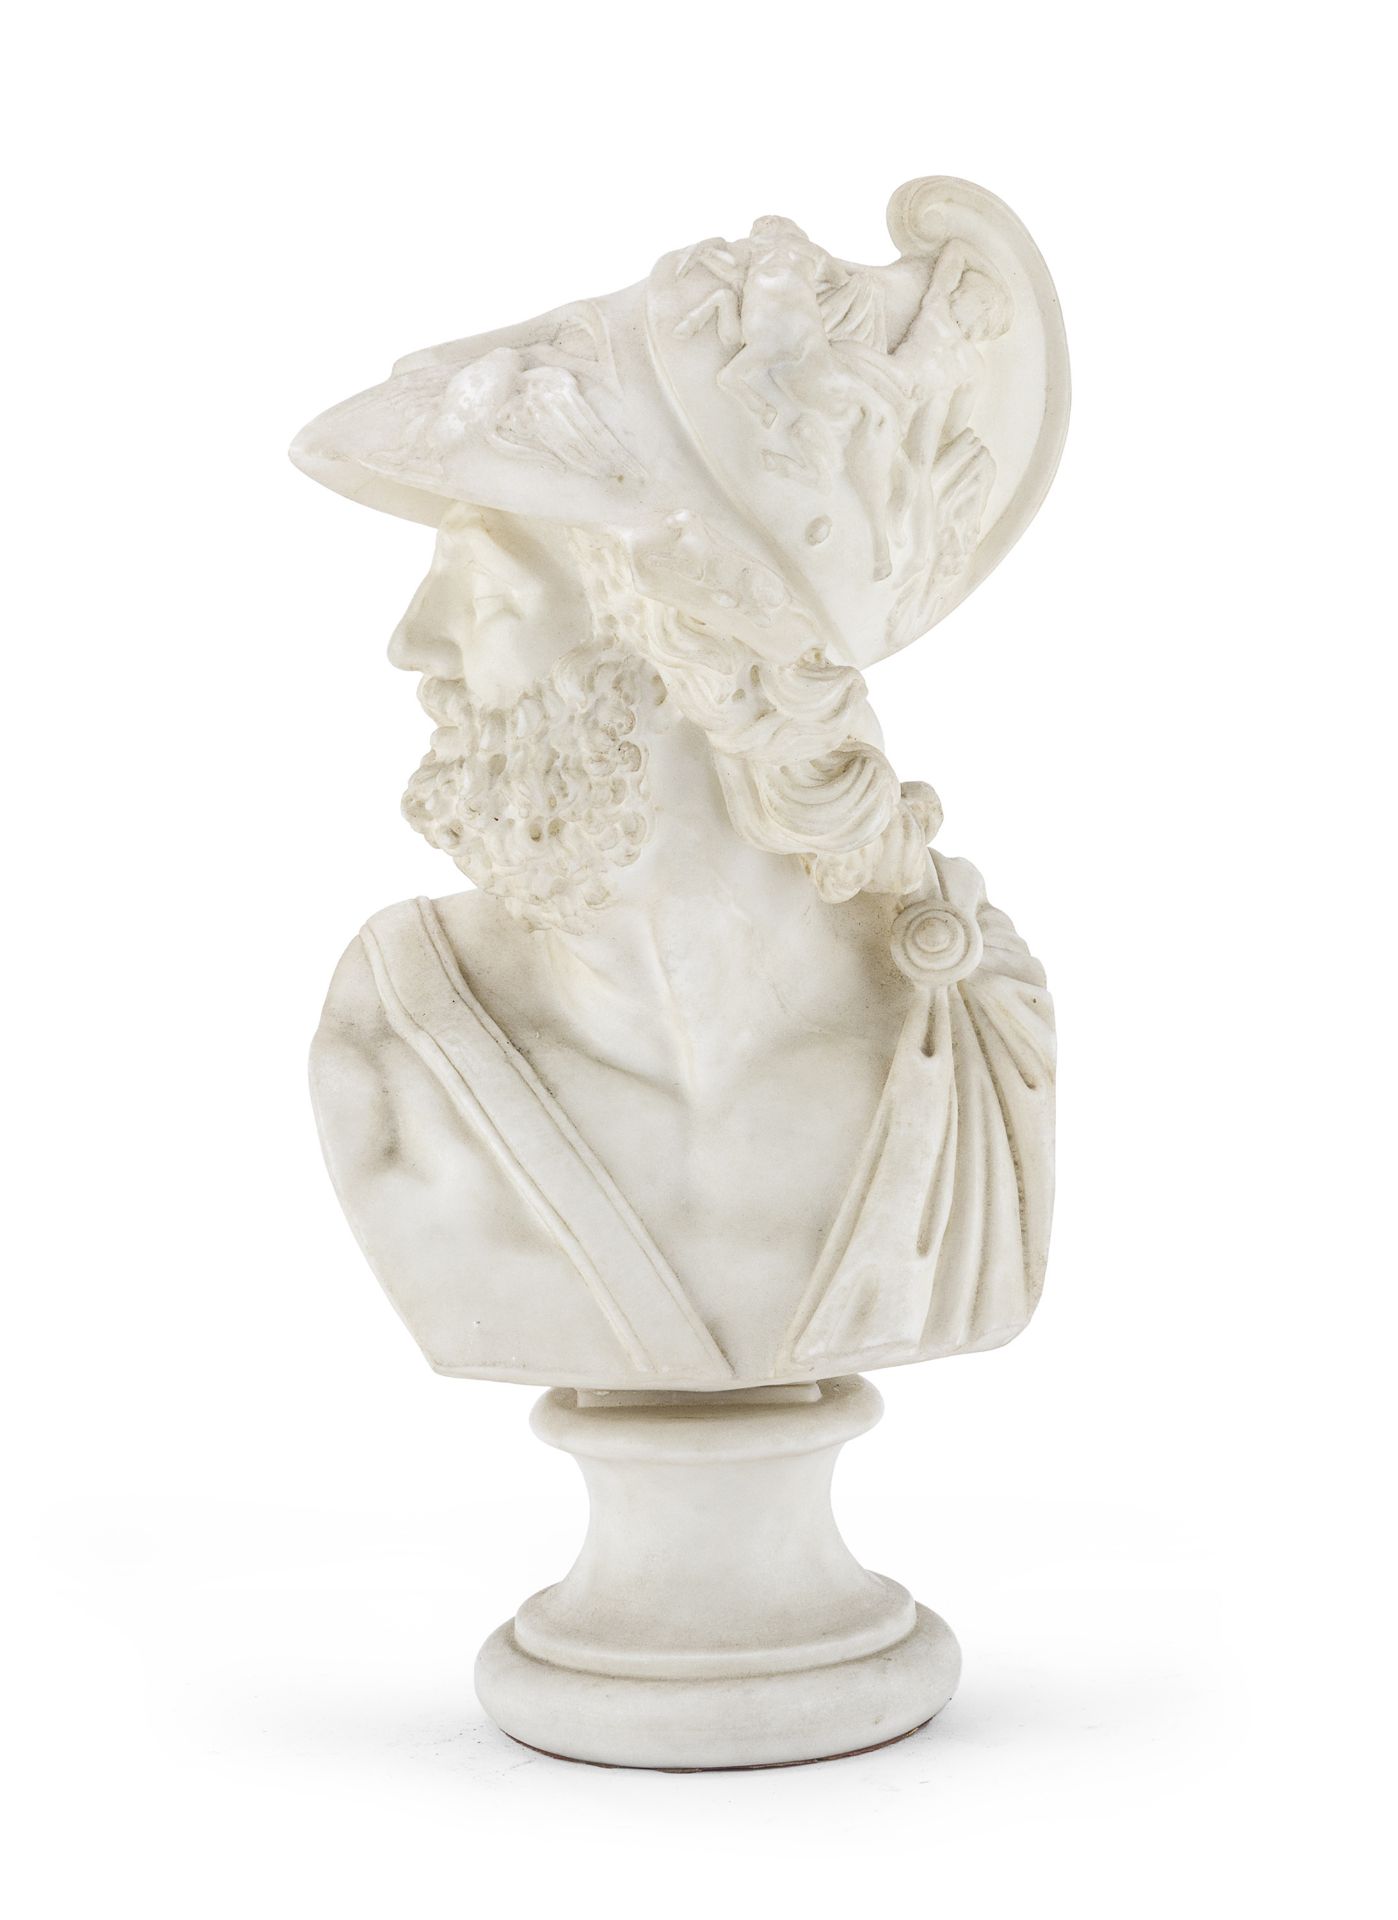 WHITE MARBLE BUST OF MENELAUS 19TH CENTURY